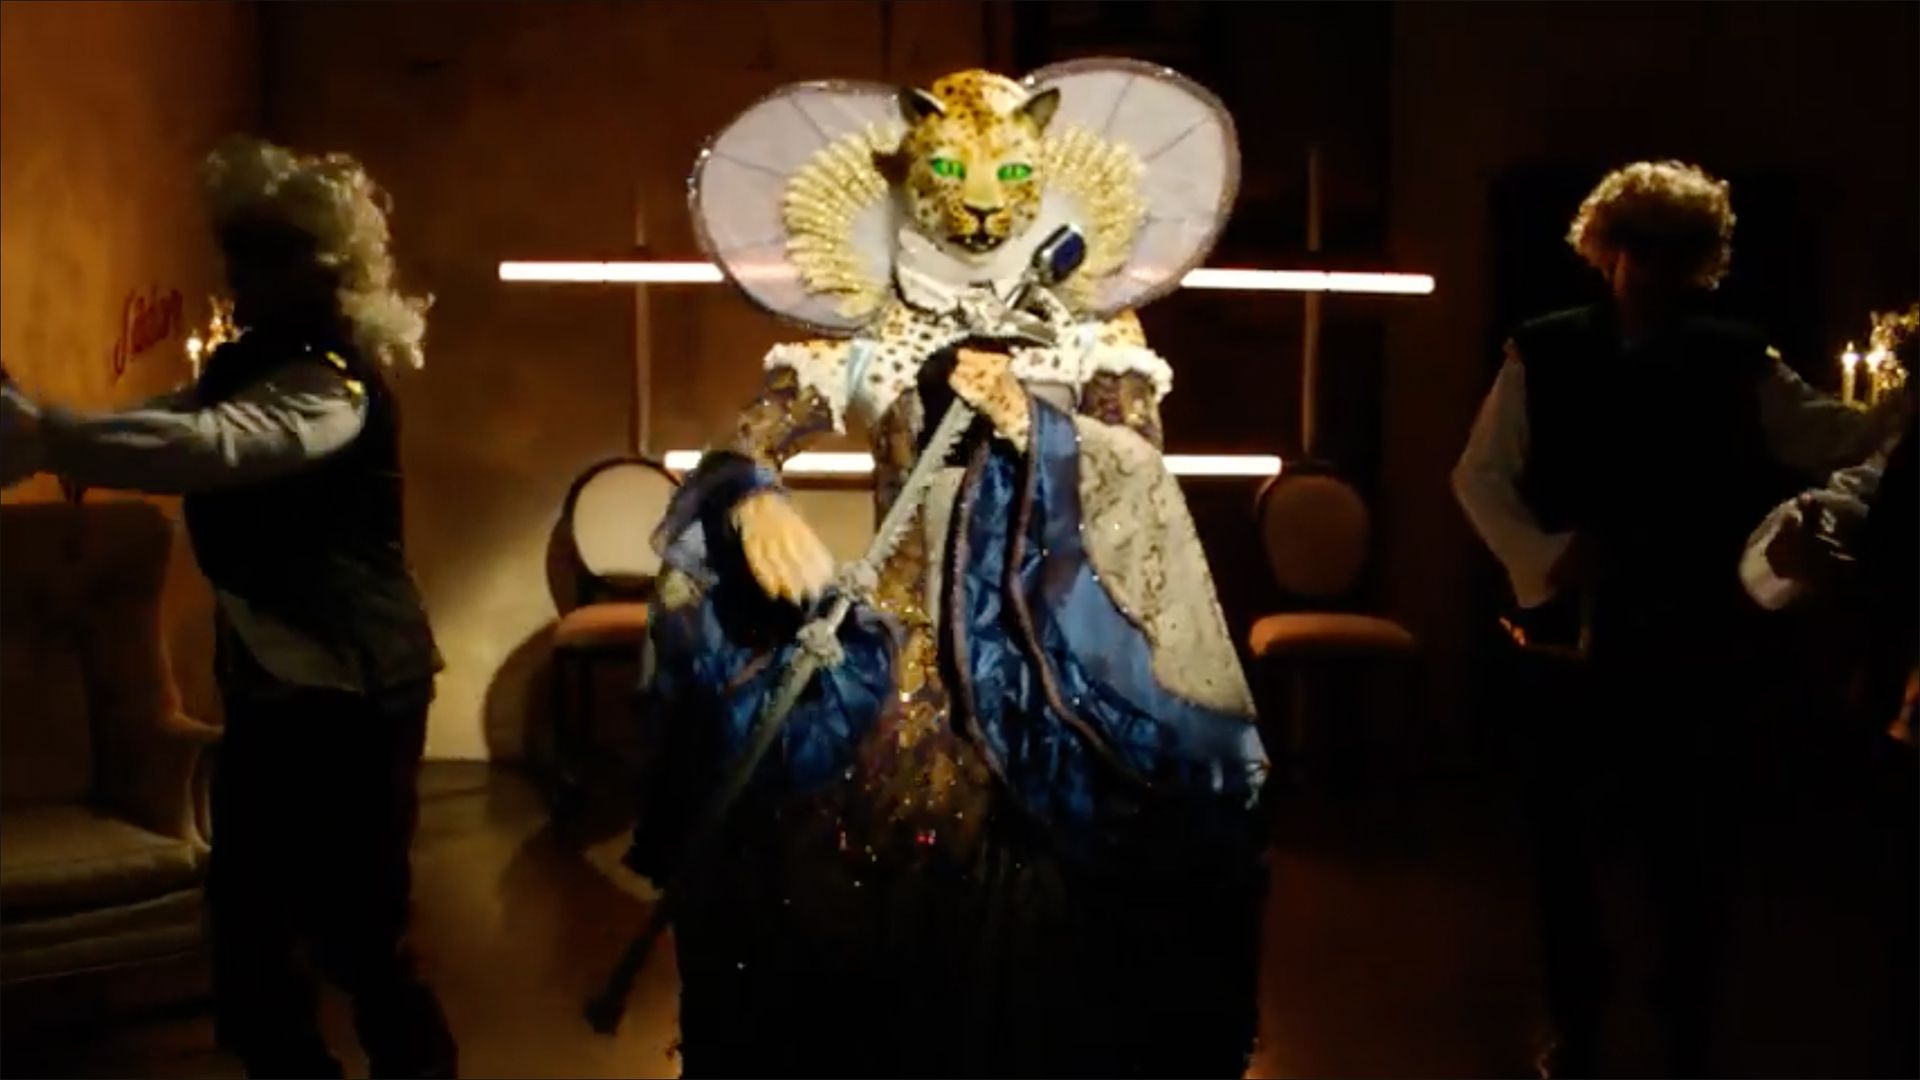 The Masked Singer Shares New Teasers (and Costumes!) for Season 2